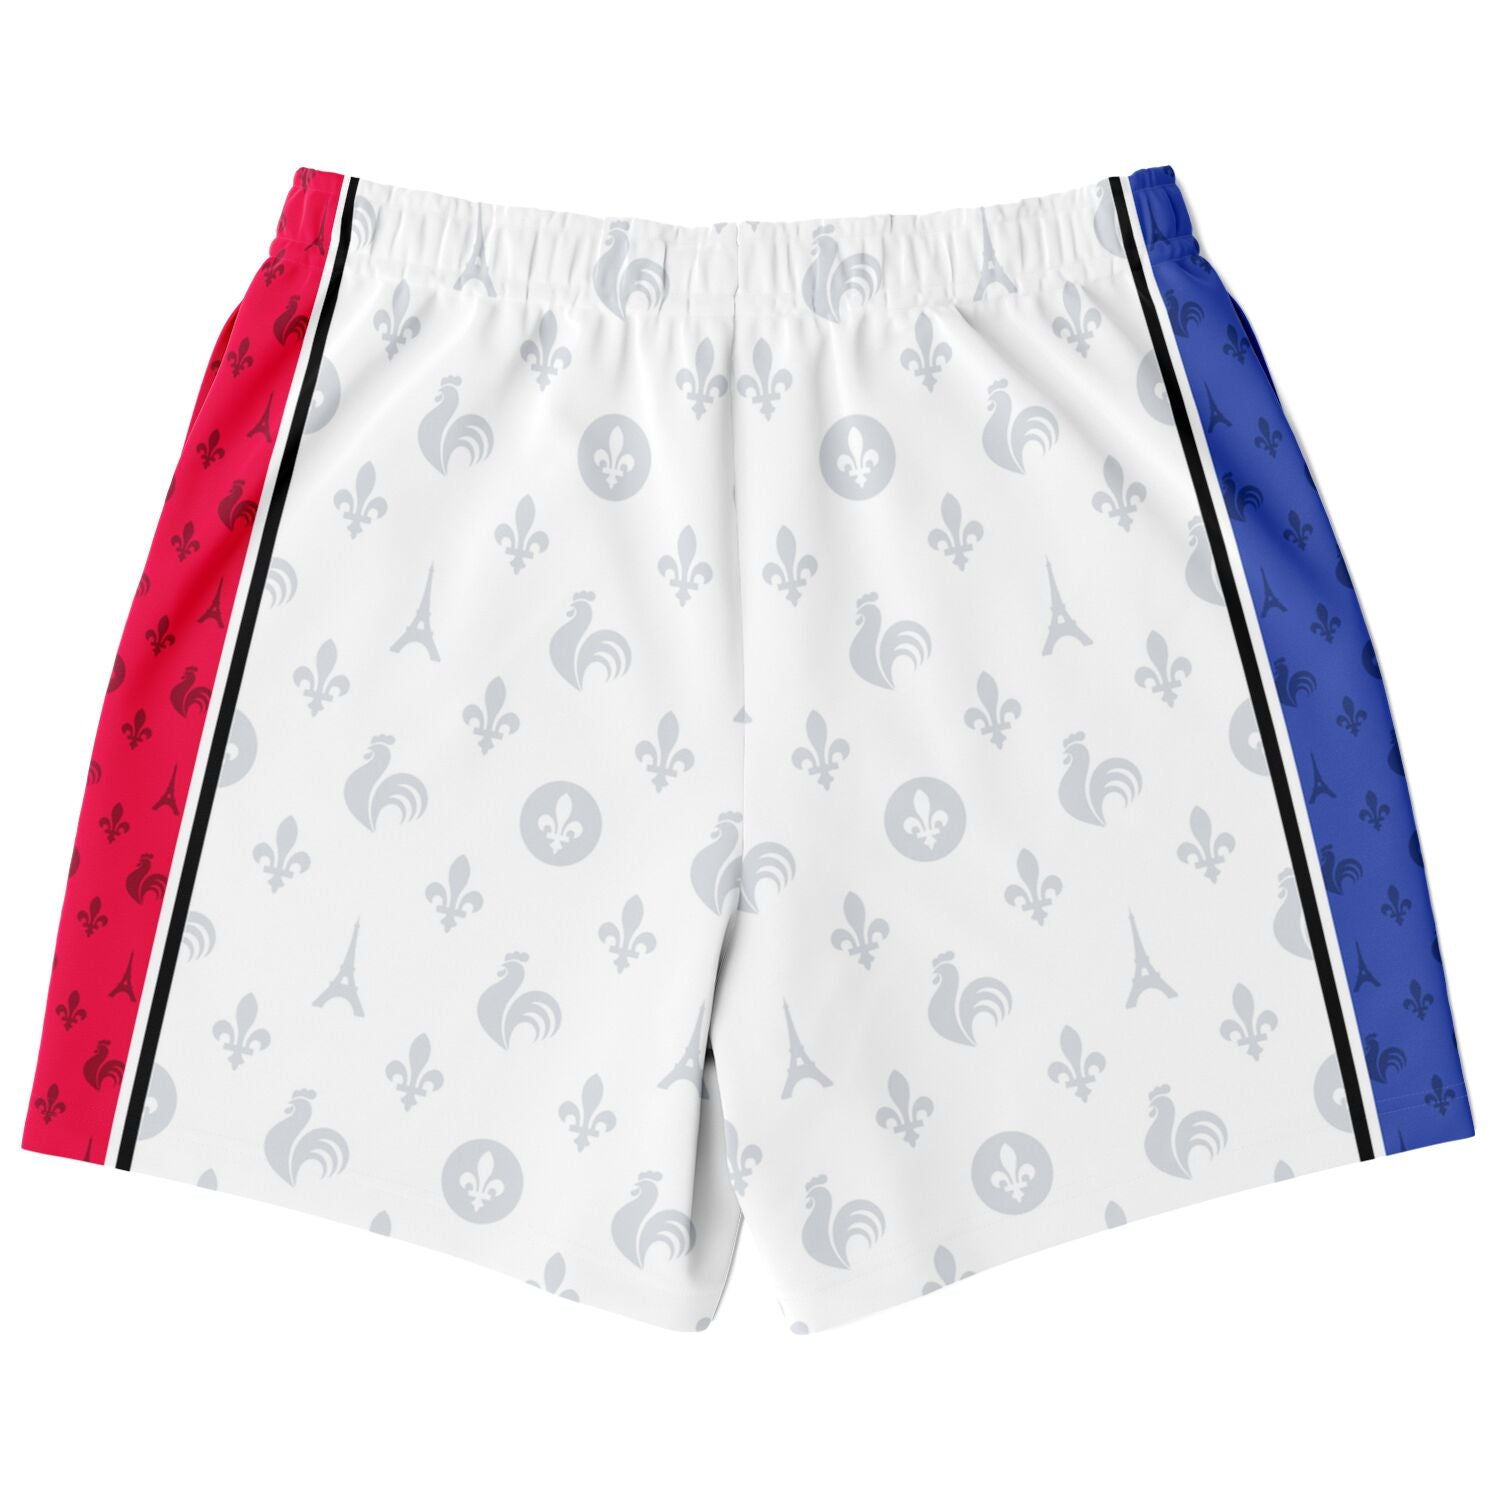 DearBBall Fashion Short - SWAGGY France Royauté White Edition